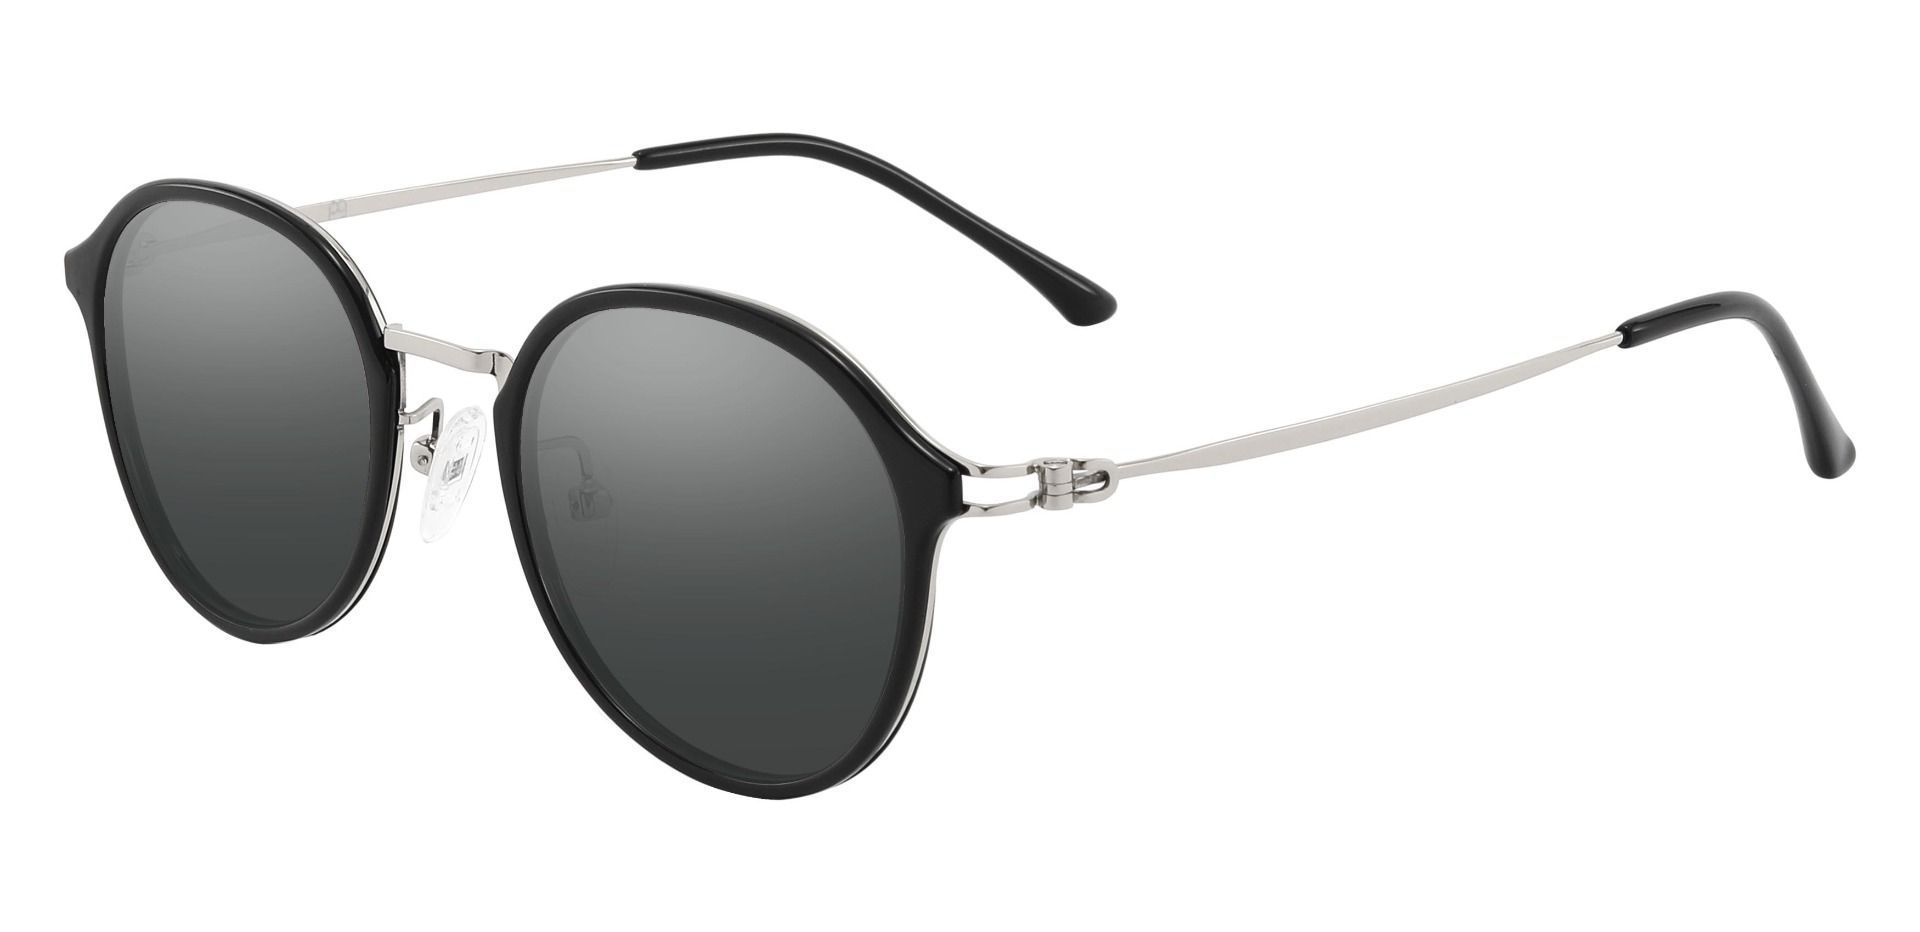 Billings Round Non-Rx Sunglasses - Black Frame With Gray Lenses